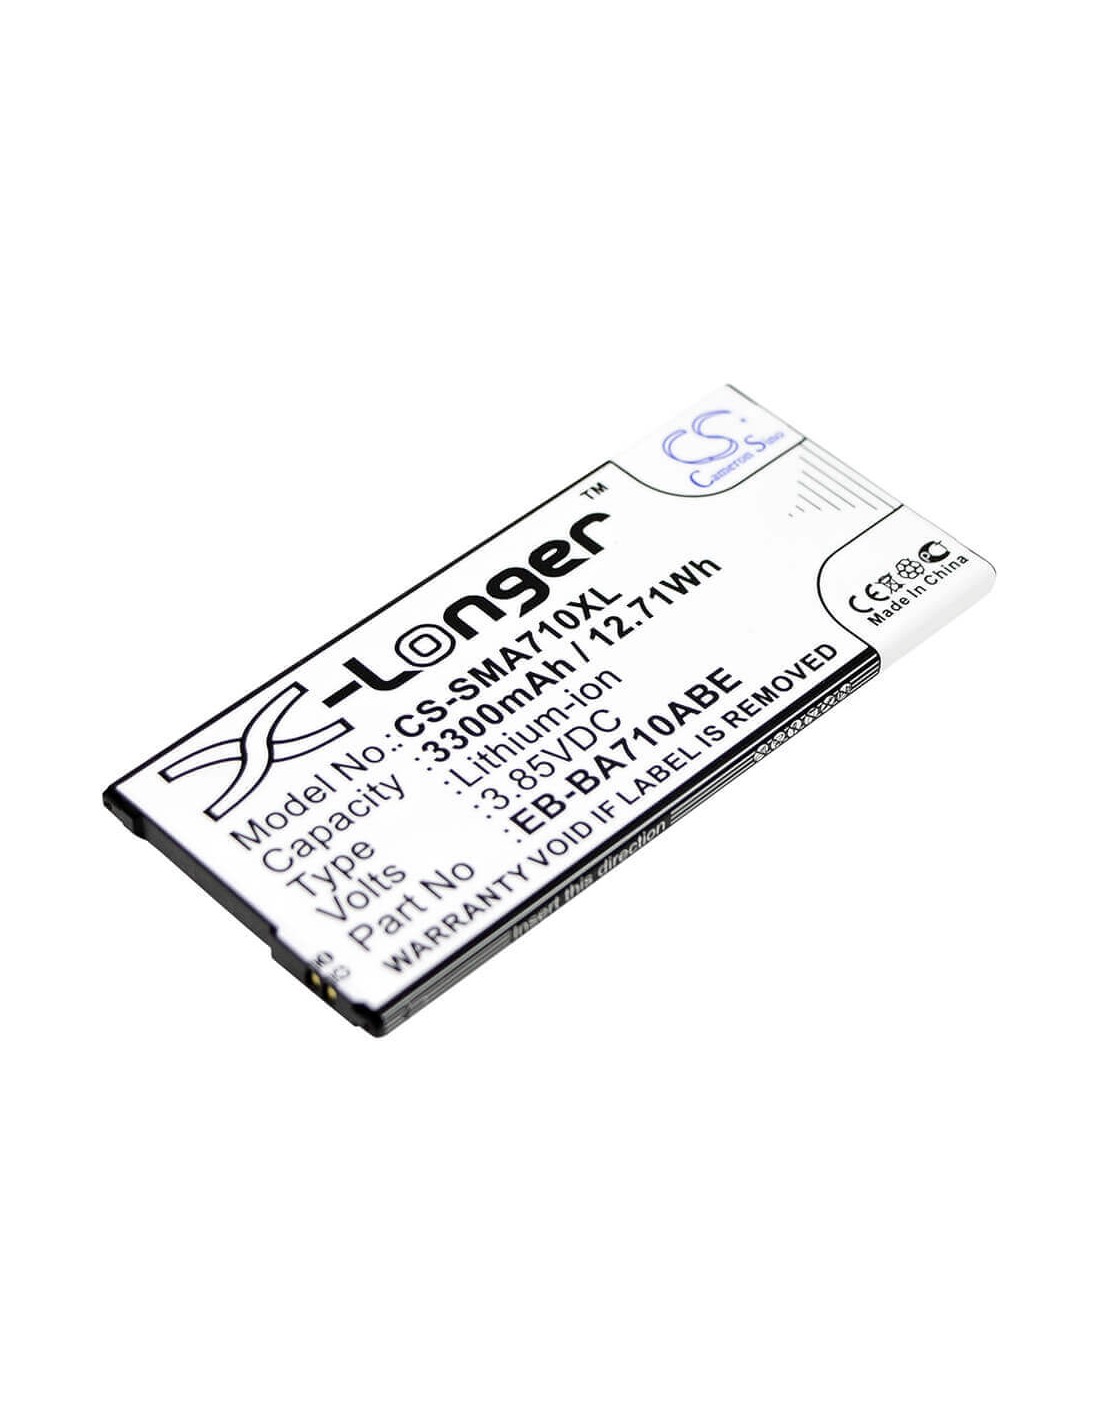 Battery for Samsung, Galaxy A7 2016 Duos, Galaxy A7 2016 Duos 3.85V, 3300mAh - 12.71Wh